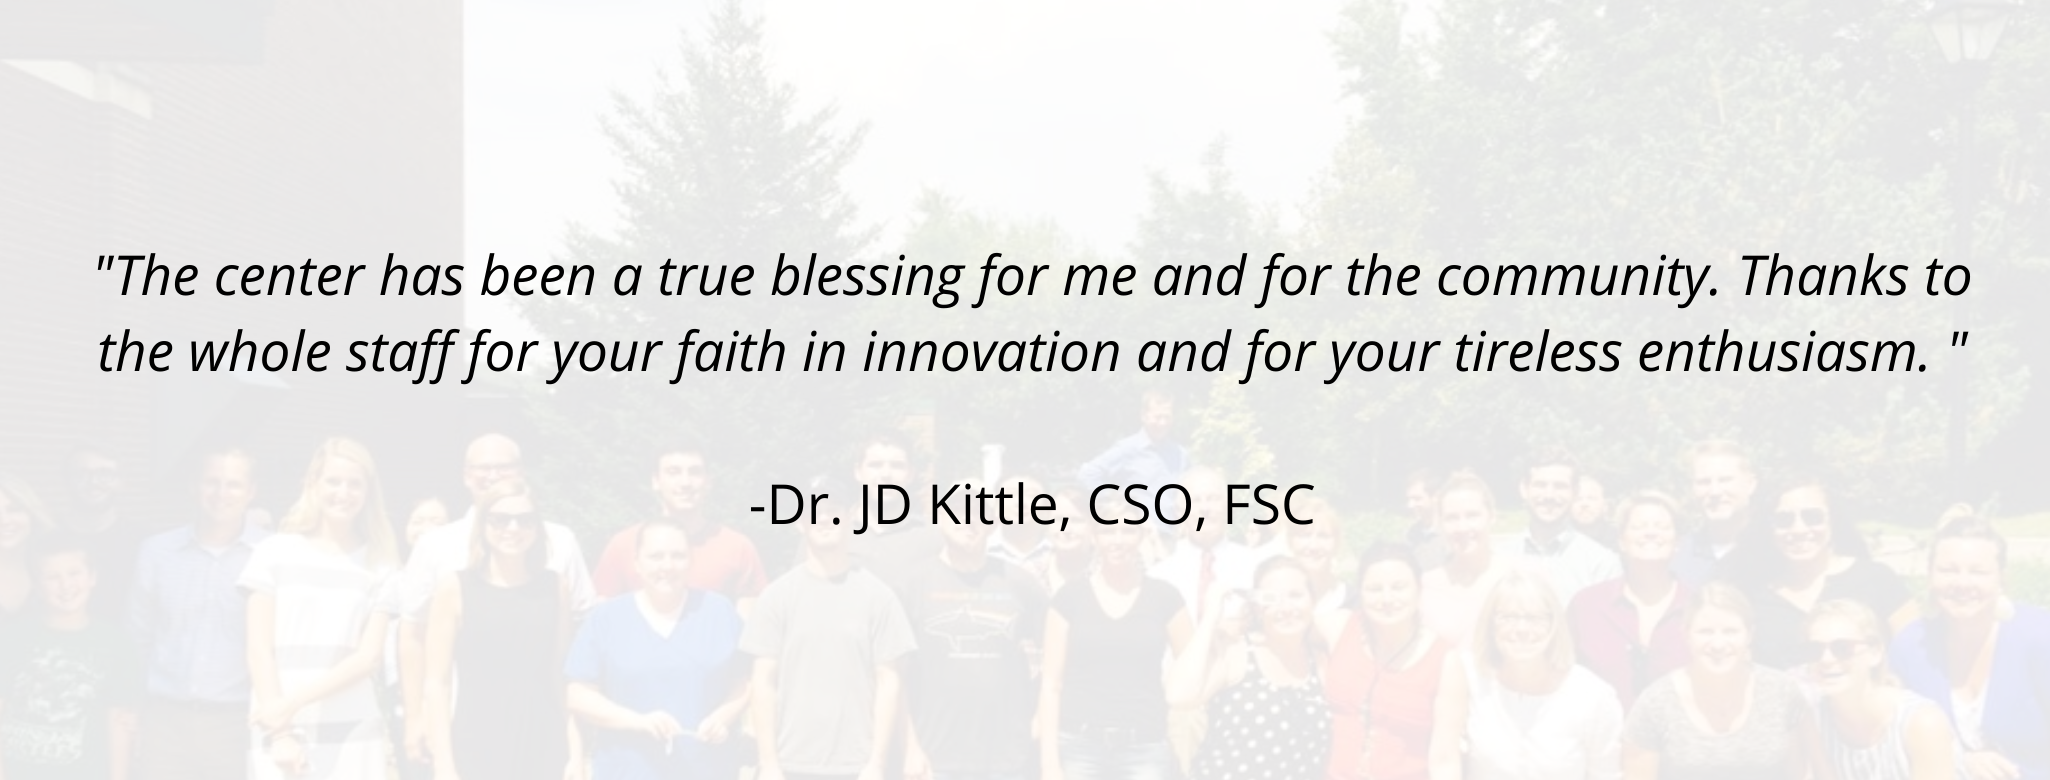 "The center has been a true blessing for me and for the community. Thanks to the whole staff for your faith in innovation and for your tireless enthusiasm. "  -Dr. JD Kittle, CSO, FSC